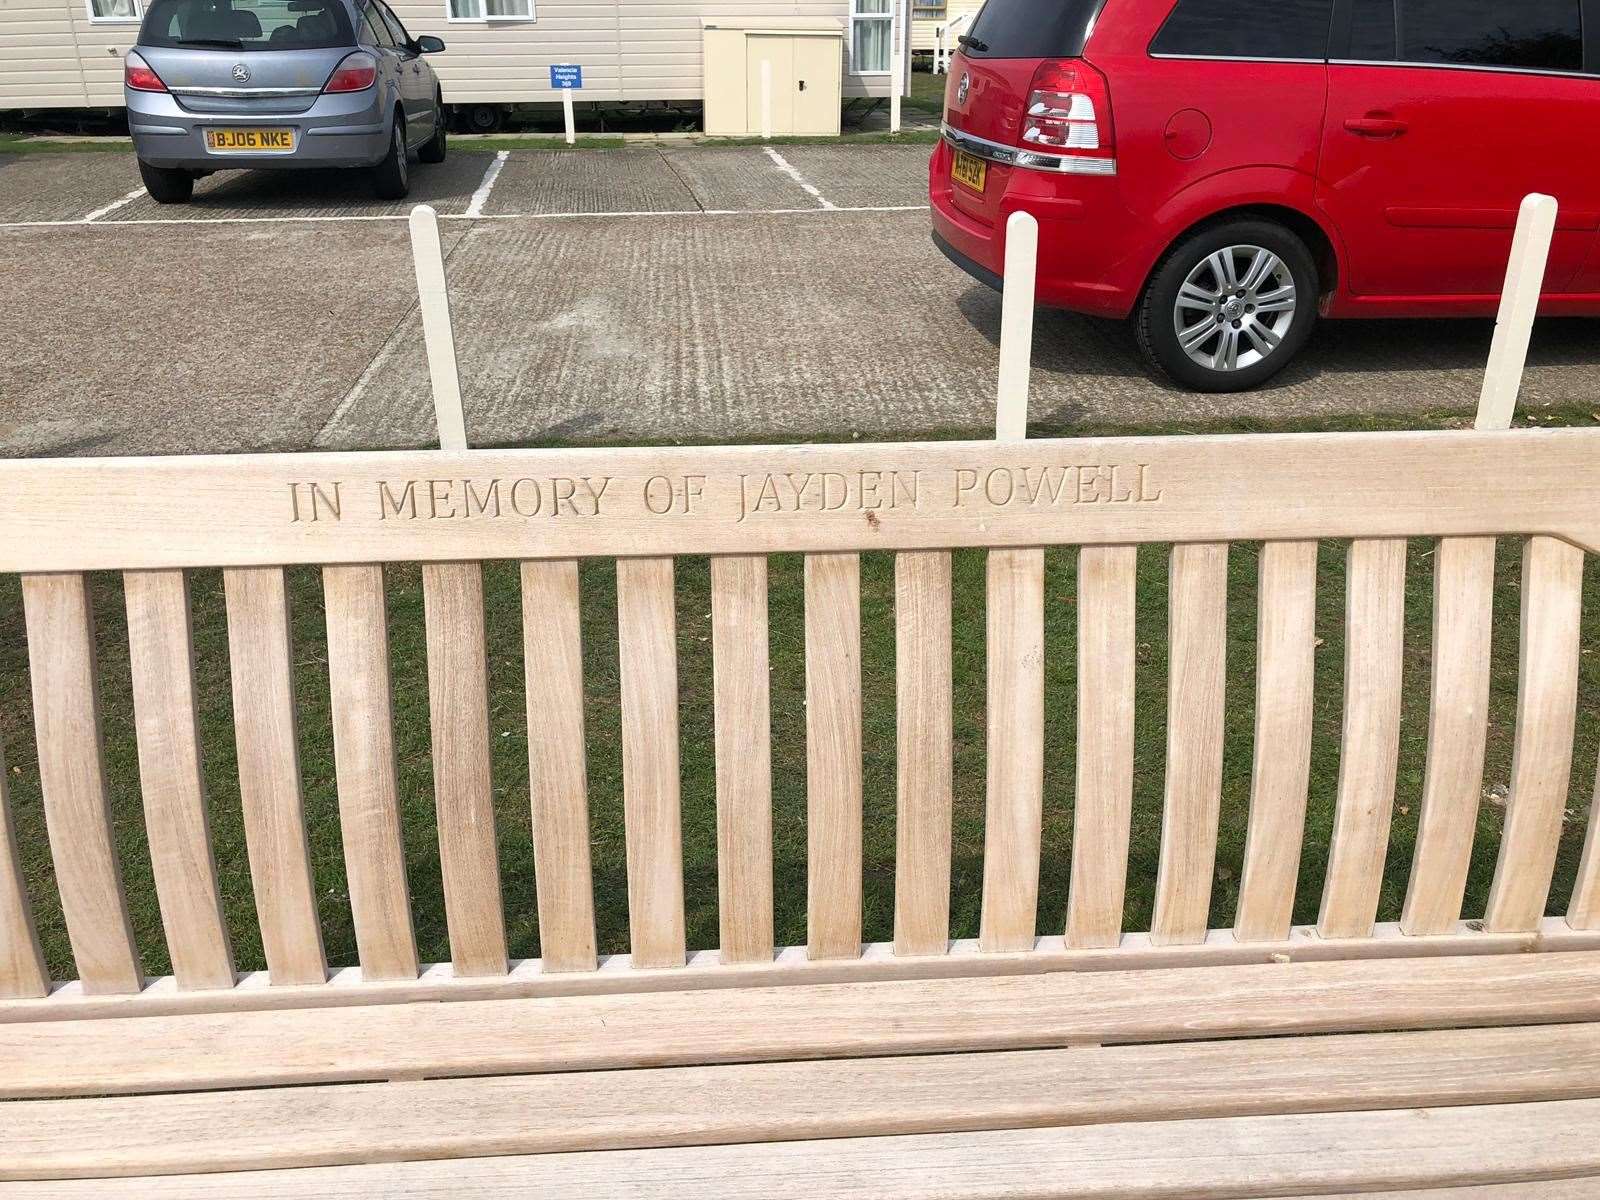 A bench has been installed in Jayden Powell's memory at the Romney Sands holiday park